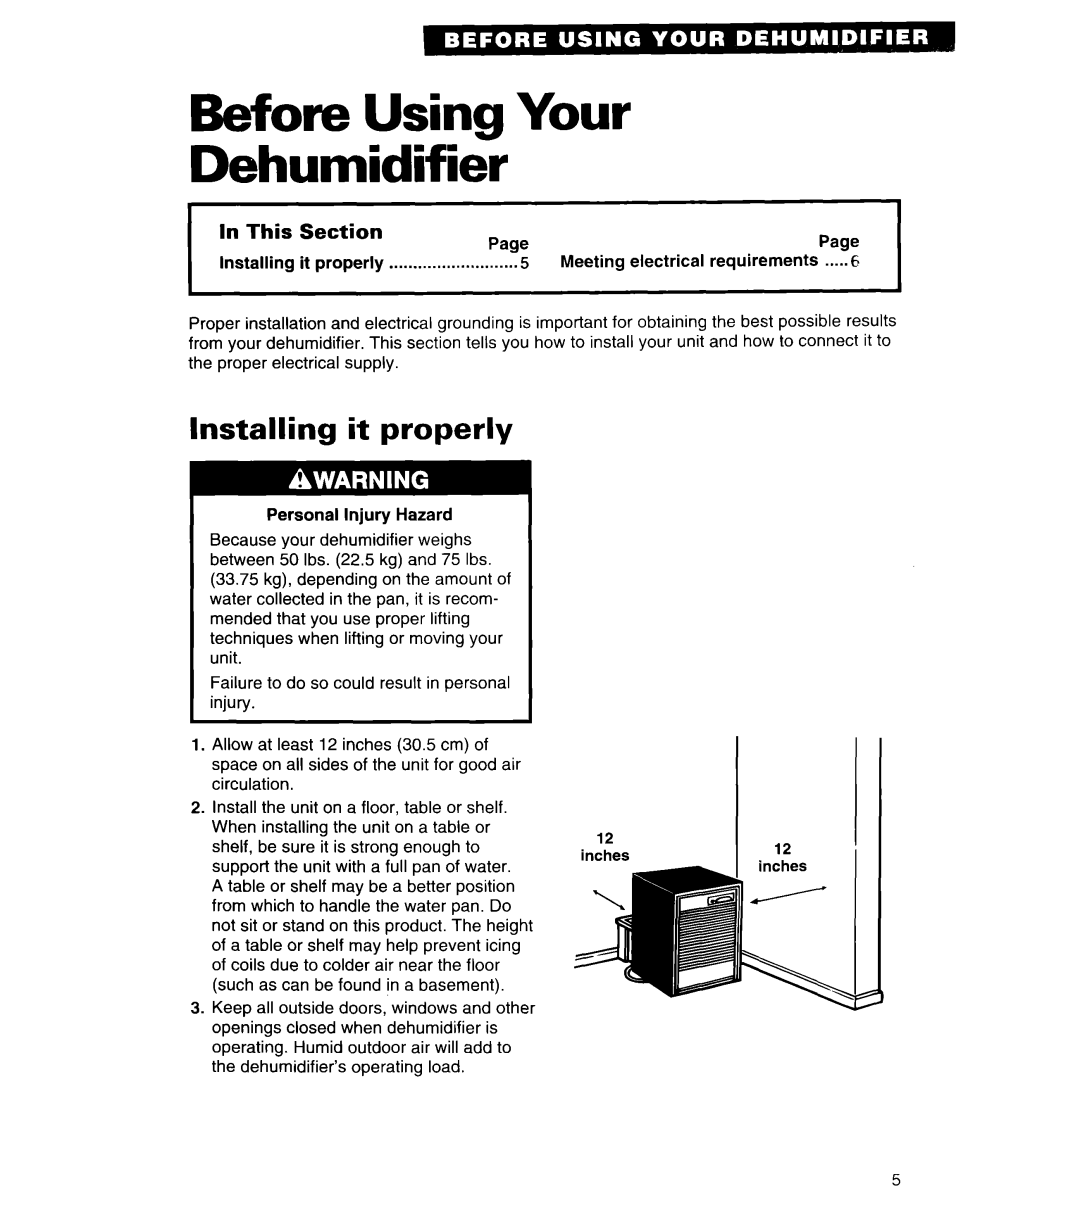 Whirlpool AD050, ADO25, AD040, AD030 important safety instructions Before Using Your Dehumidifier, Installing it properly 